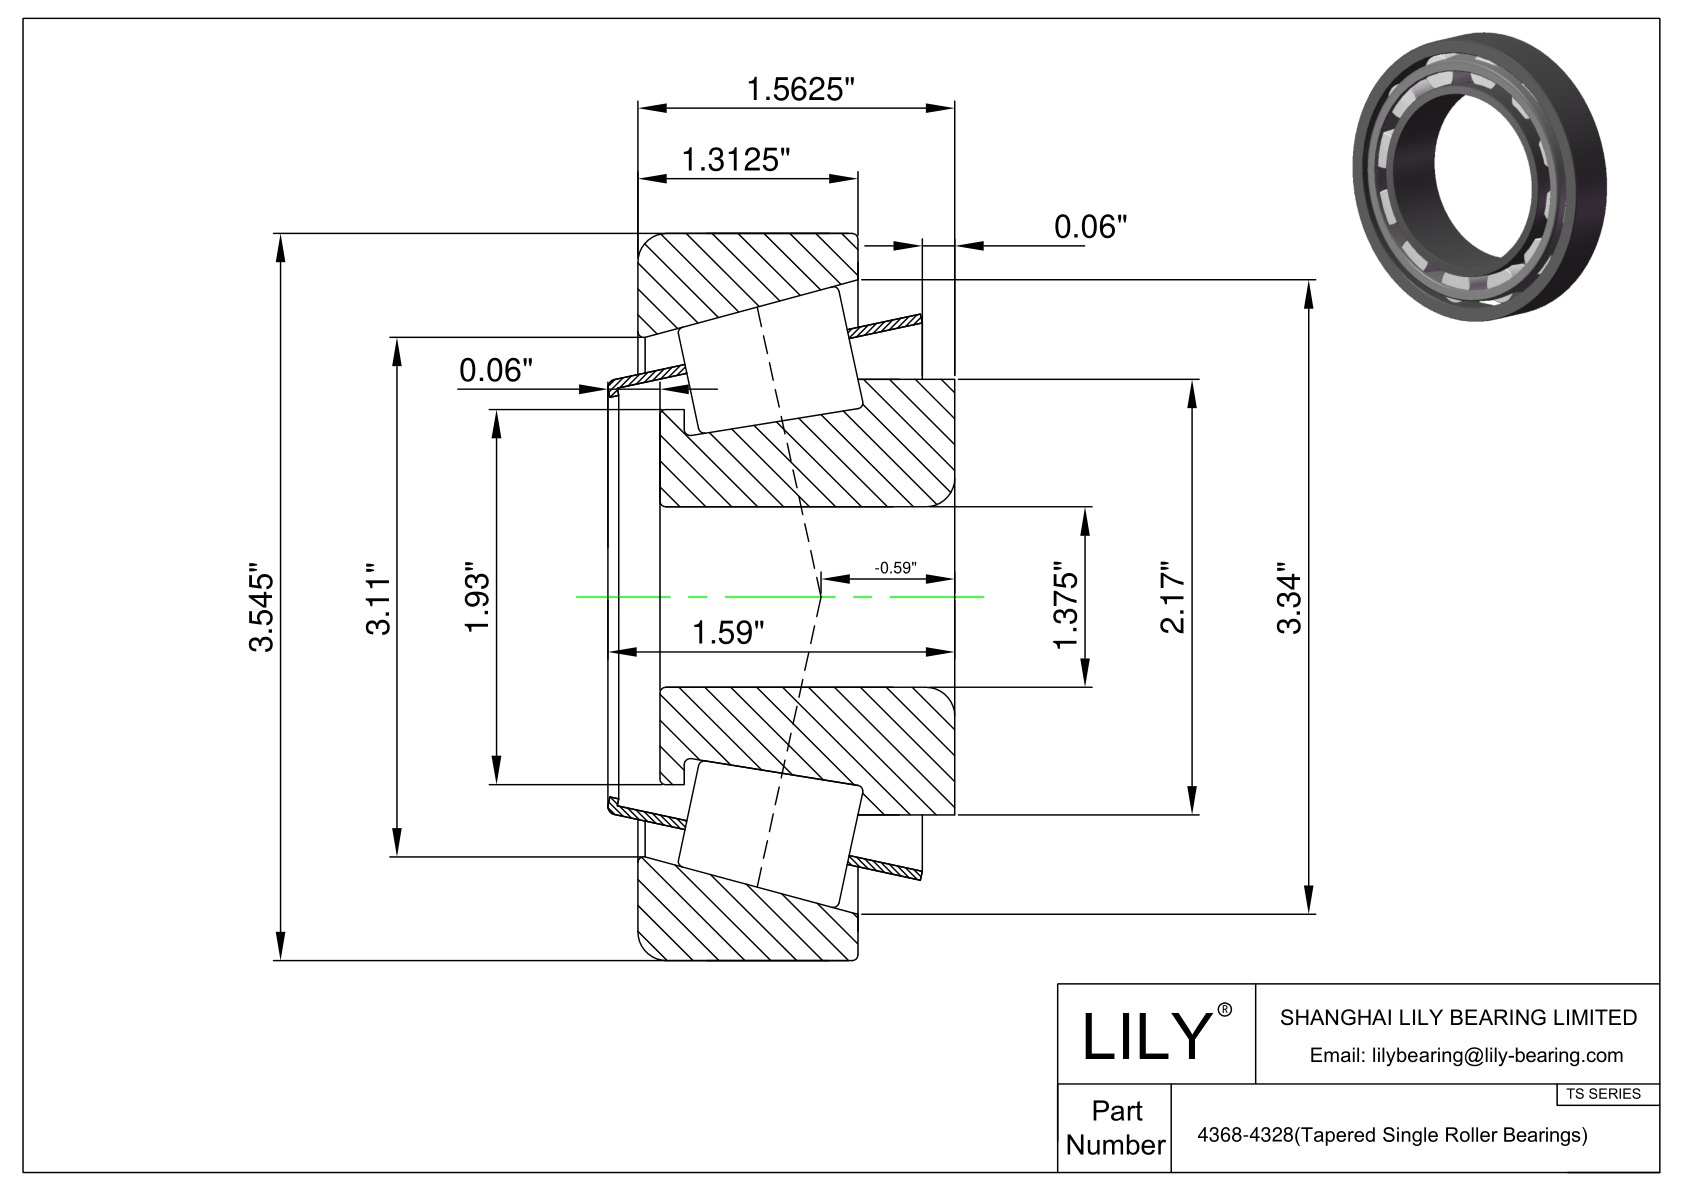 4368-4328 TS (Tapered Single Roller Bearings) (Imperial) cad drawing